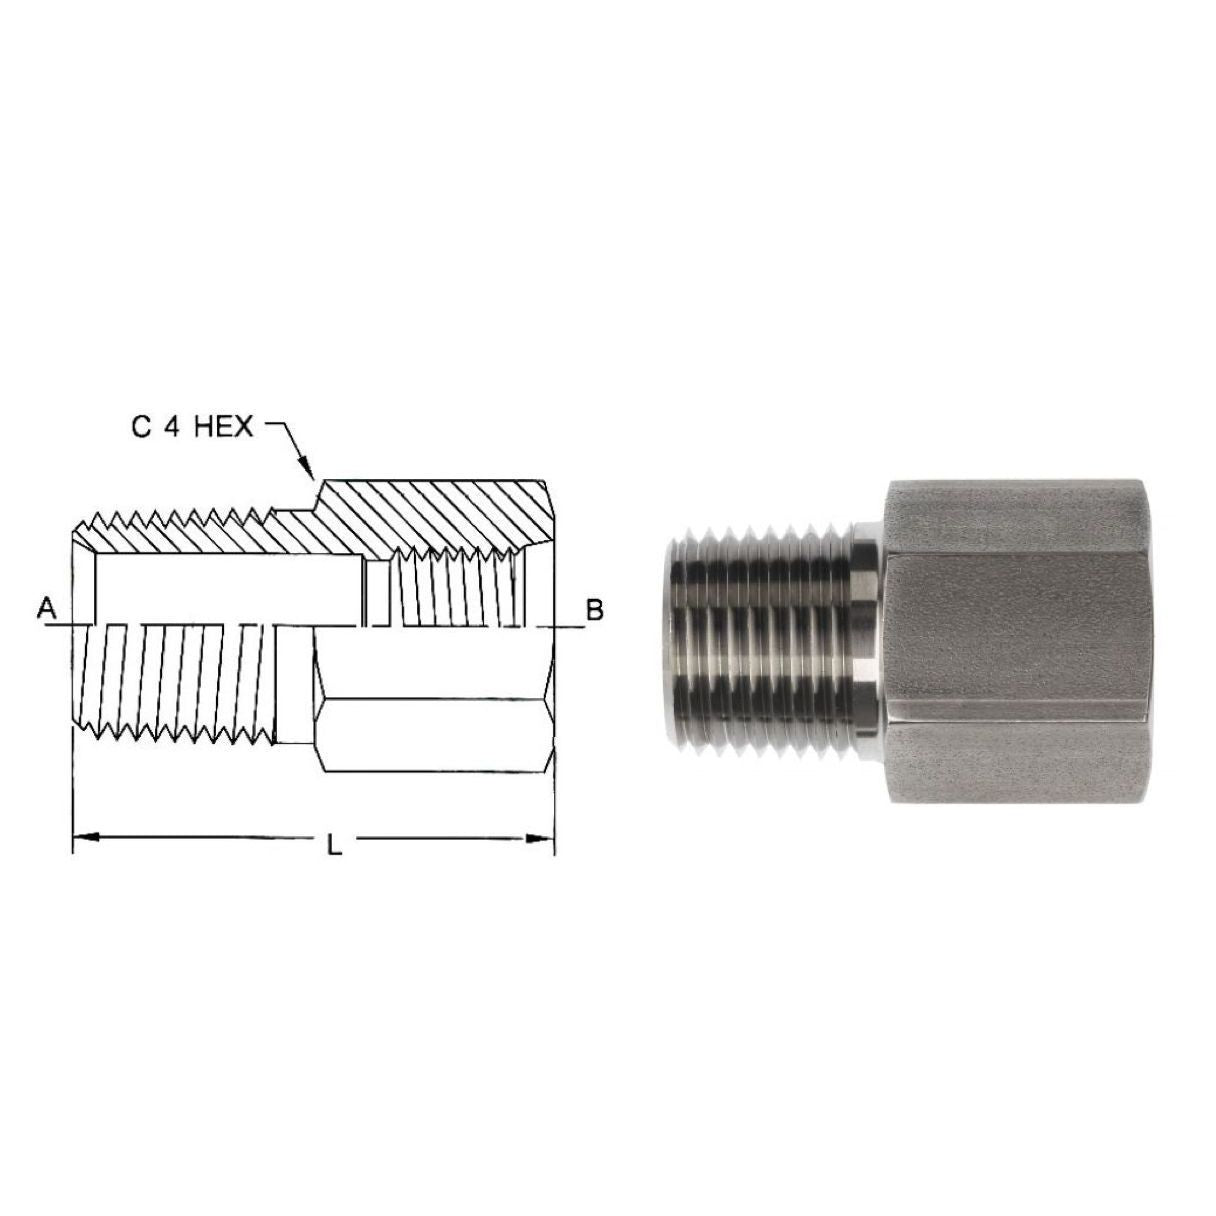 6404-06-04 : OneHydraulics Adapter, Straight, 0.375 (3/8") Female ORB x 0.25 (1/4") Male, Steel, 6000psi